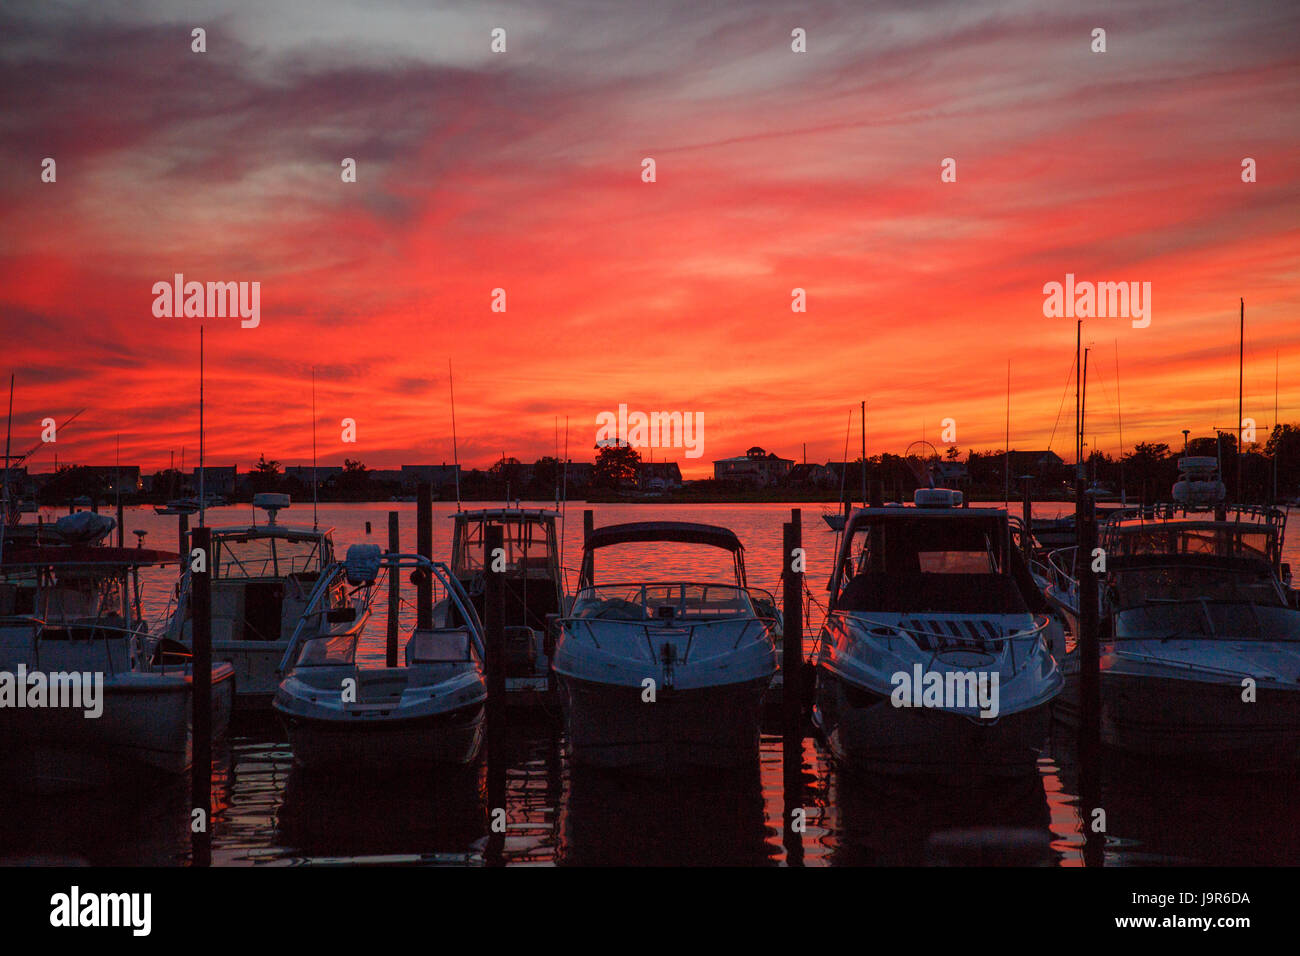 sunset view at sag harbor in the hamptons with powerboats at the docks, Stock Photo